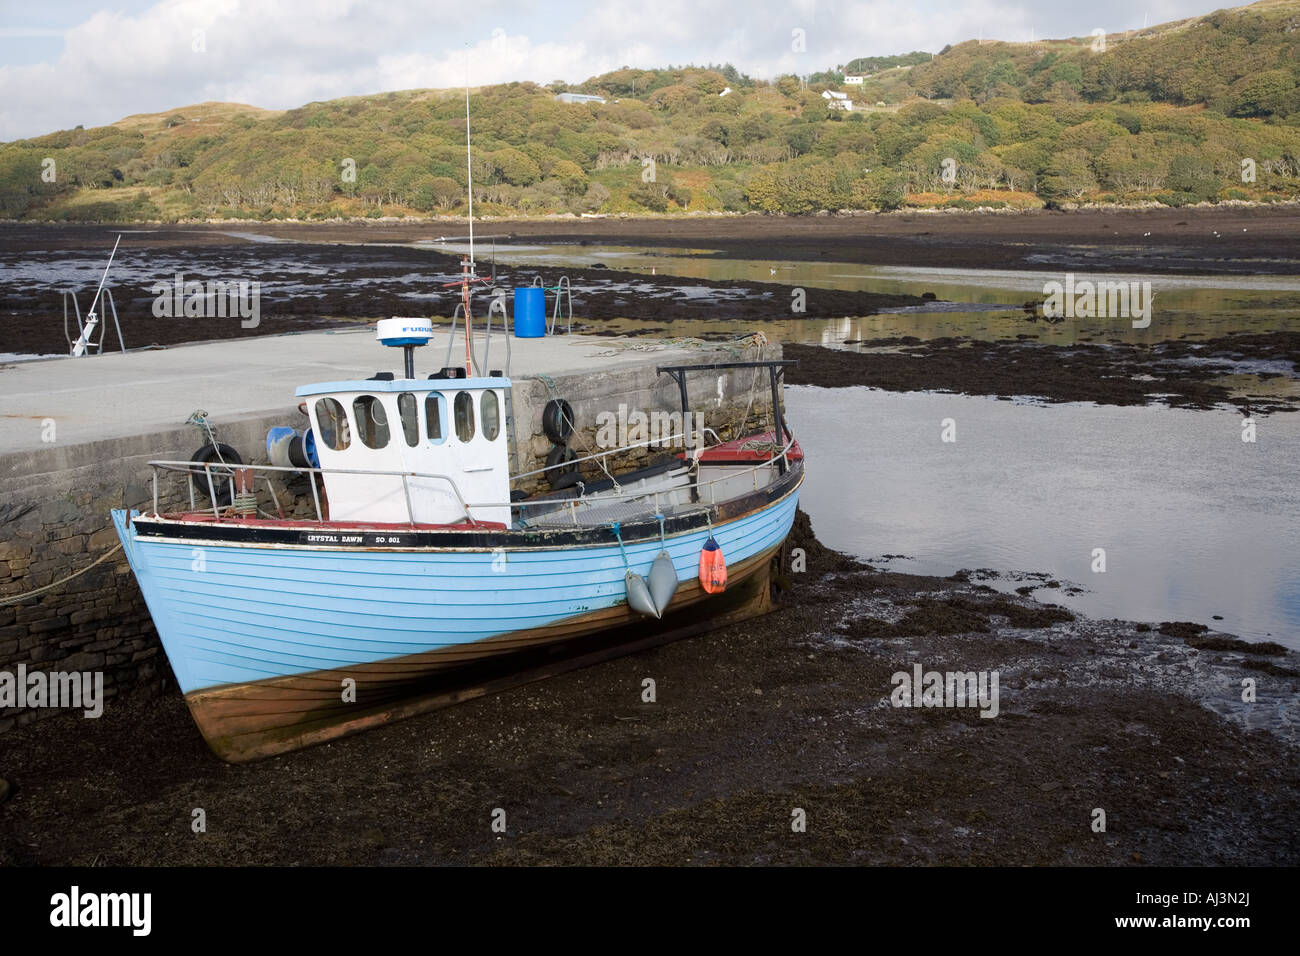 Stock photo of small boat grounded in low tide Shot in Teelin Bay County Donegal Ireland in October 2007 Stock Photo